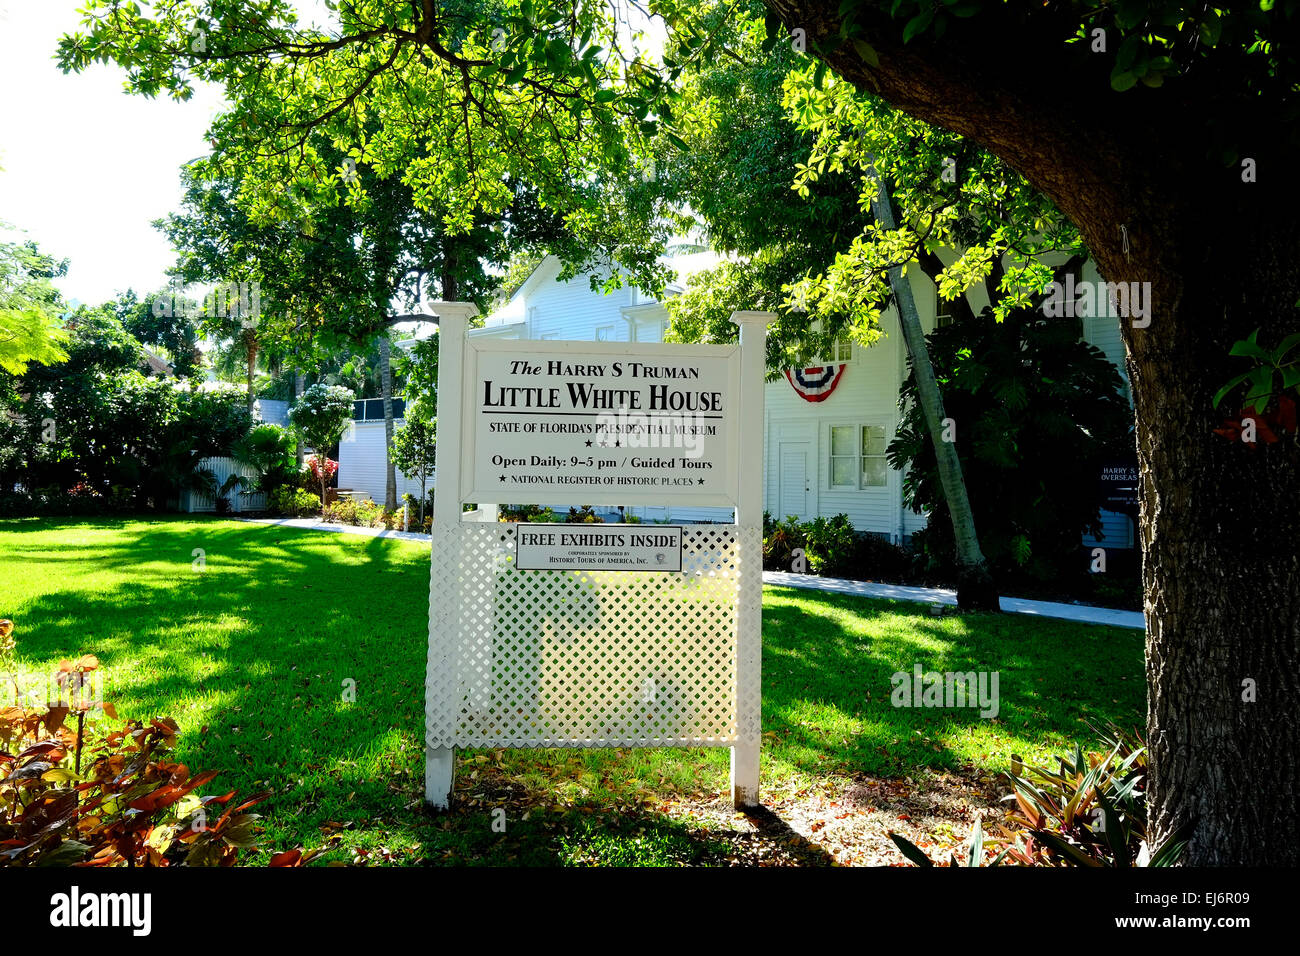 Little White House President Harry Truman Key West Florida FL destination for Western Carribbean Crusie from Tampa Stock Photo